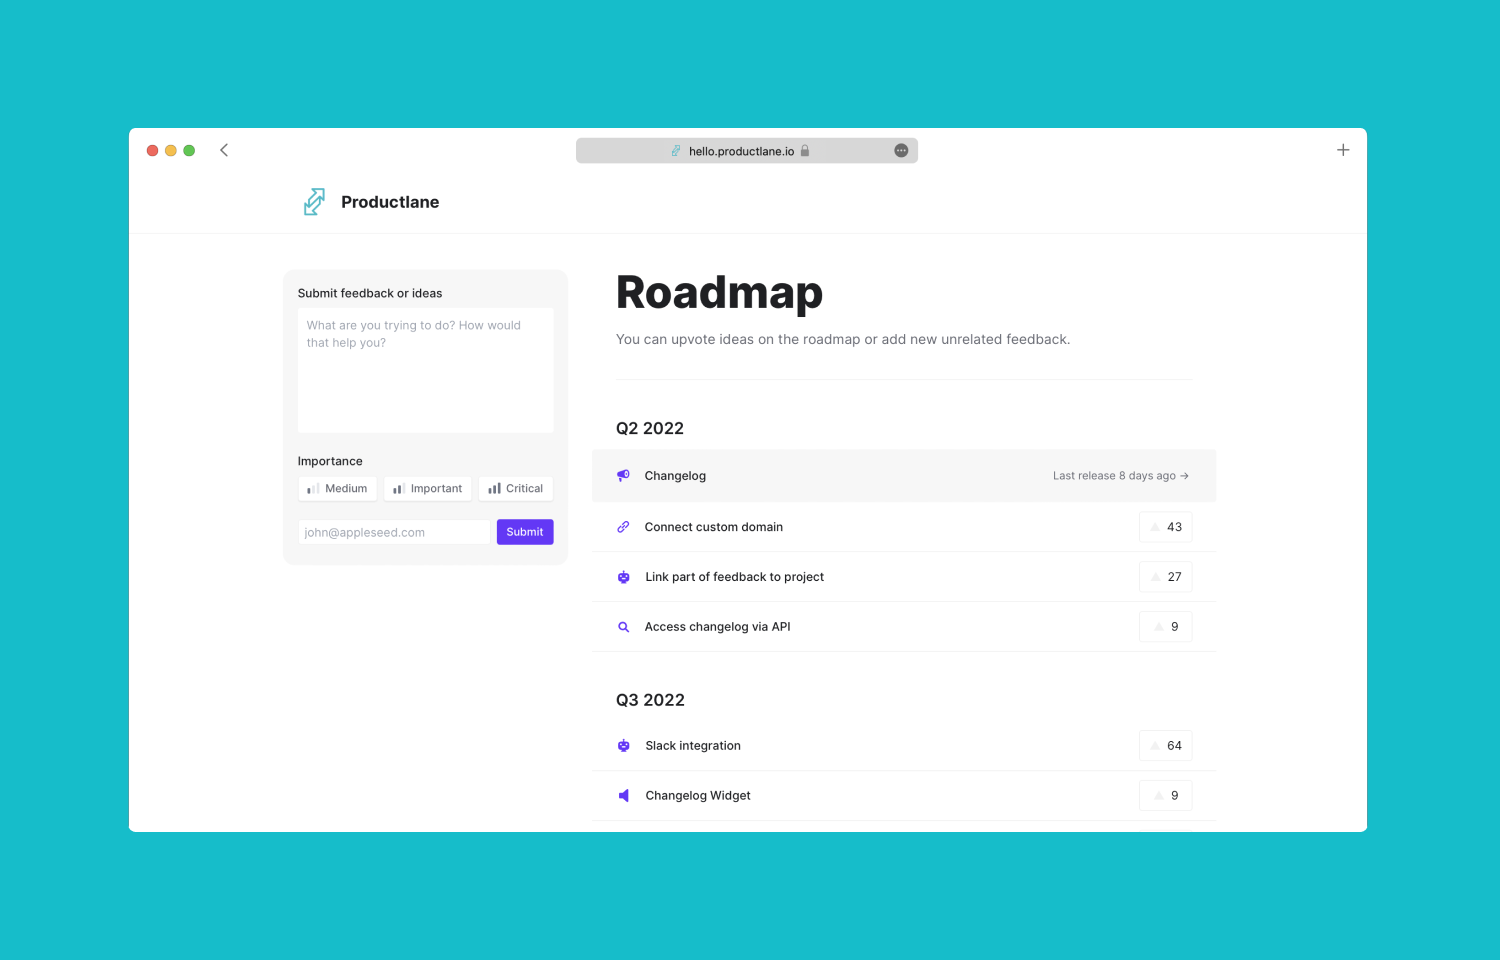 Productlane's public Roadmap with items under Q2 2022 and Q3 2022.